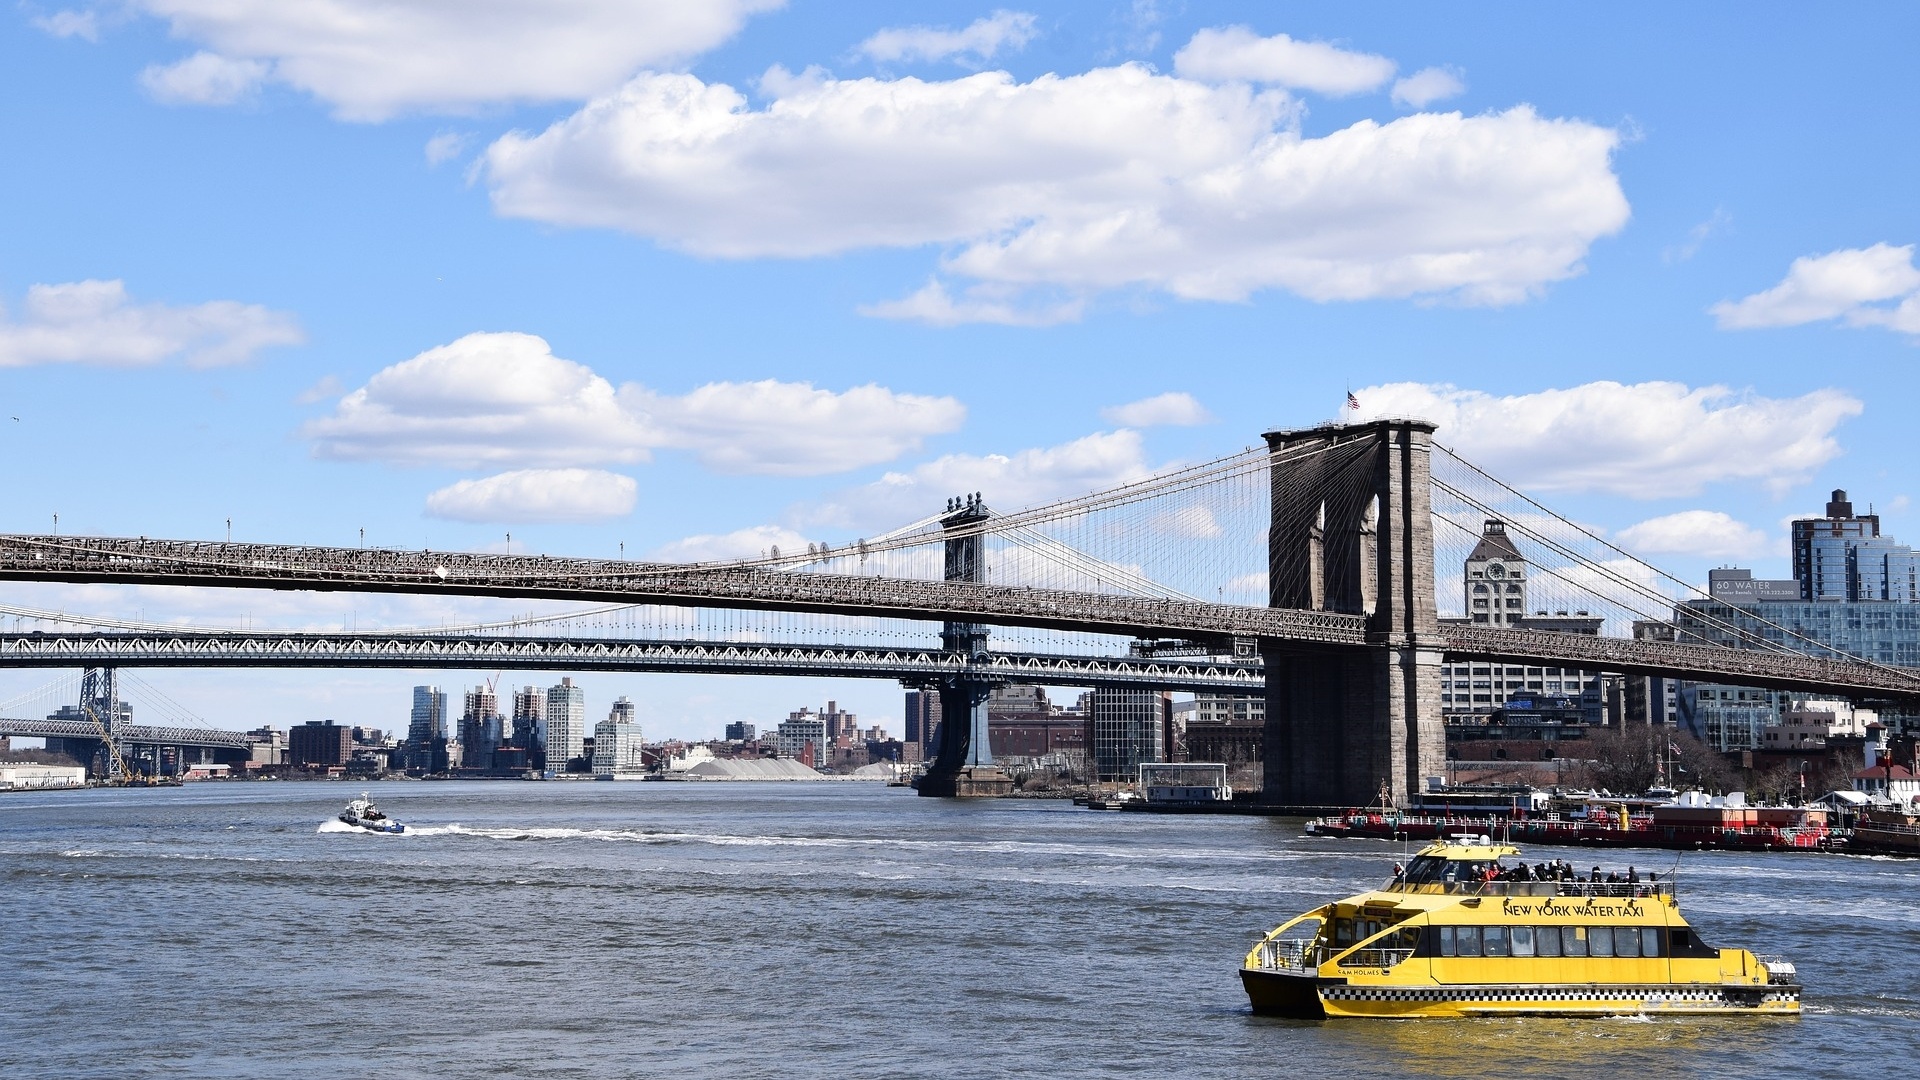 Water Taxi: The premier source for marine transportation in NYC, Boat sightseeing. 1920x1080 Full HD Wallpaper.